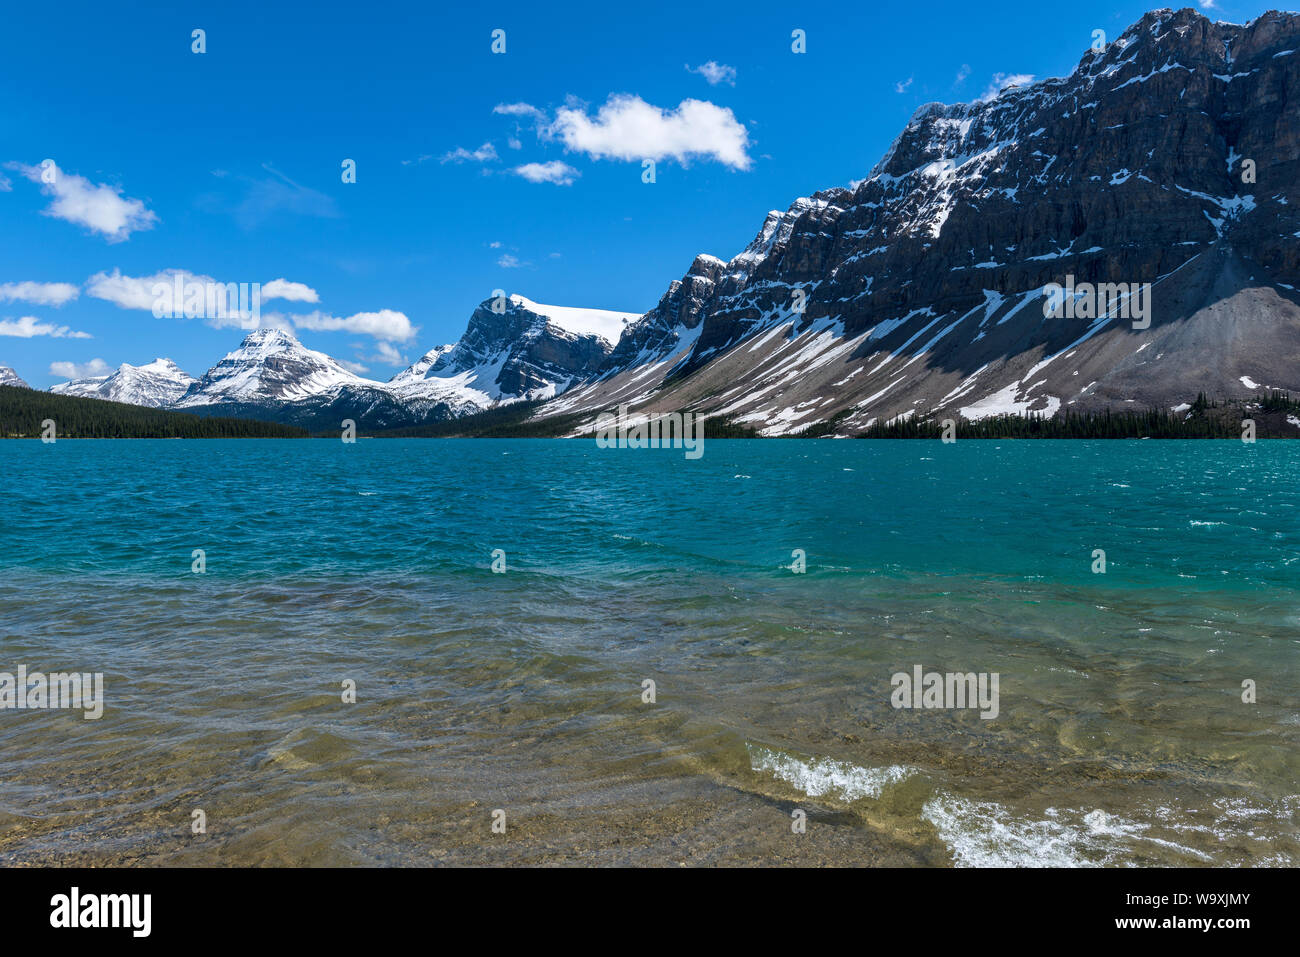 Bow Lake - A sunny Spring day view of crystal-clear and colorful Bow Lake, surrounded by snow-capped high peaks, at Banff National Park, AB, Canada. Stock Photo